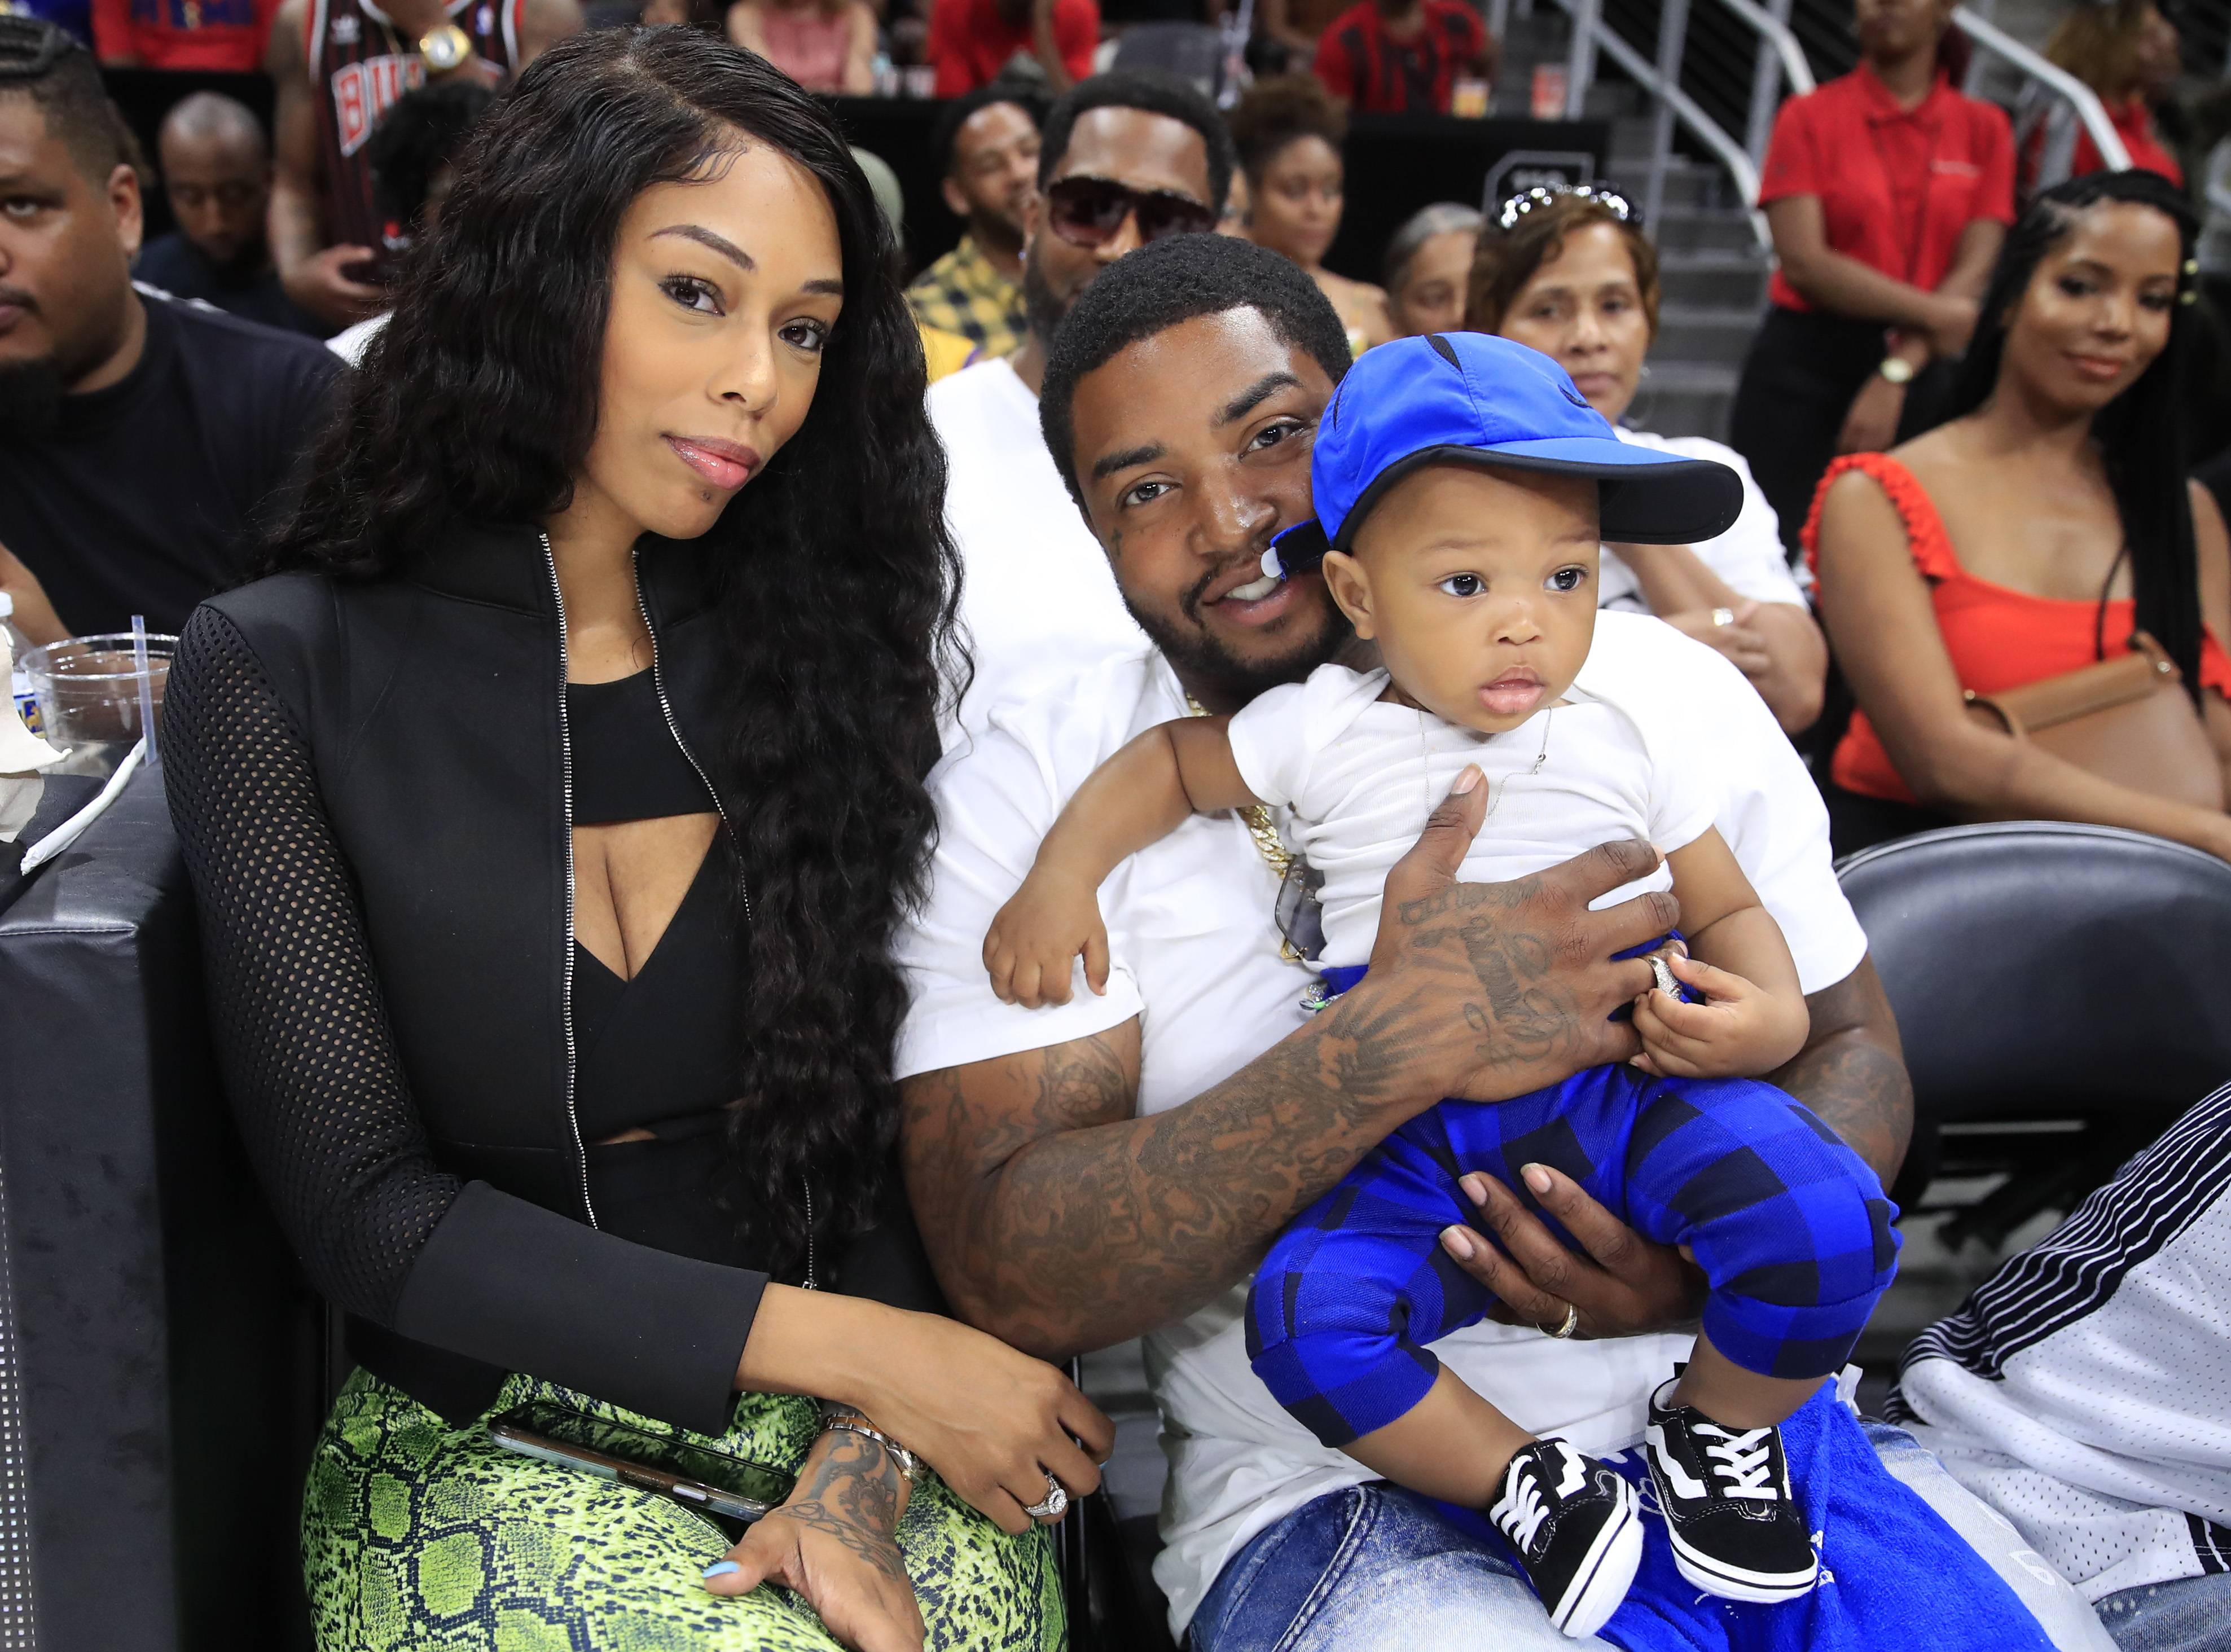 ATLANTA, GEORGIA - JULY 07: Bambi, Lil Scrappy and their baby Breland attend the game between Power and Trilogy during week three of the BIG3 three on three basketball league at State Farm Arena on July 07, 2019 in Atlanta, Georgia. (Photo by Andy Lyons/BIG3/Getty Images)